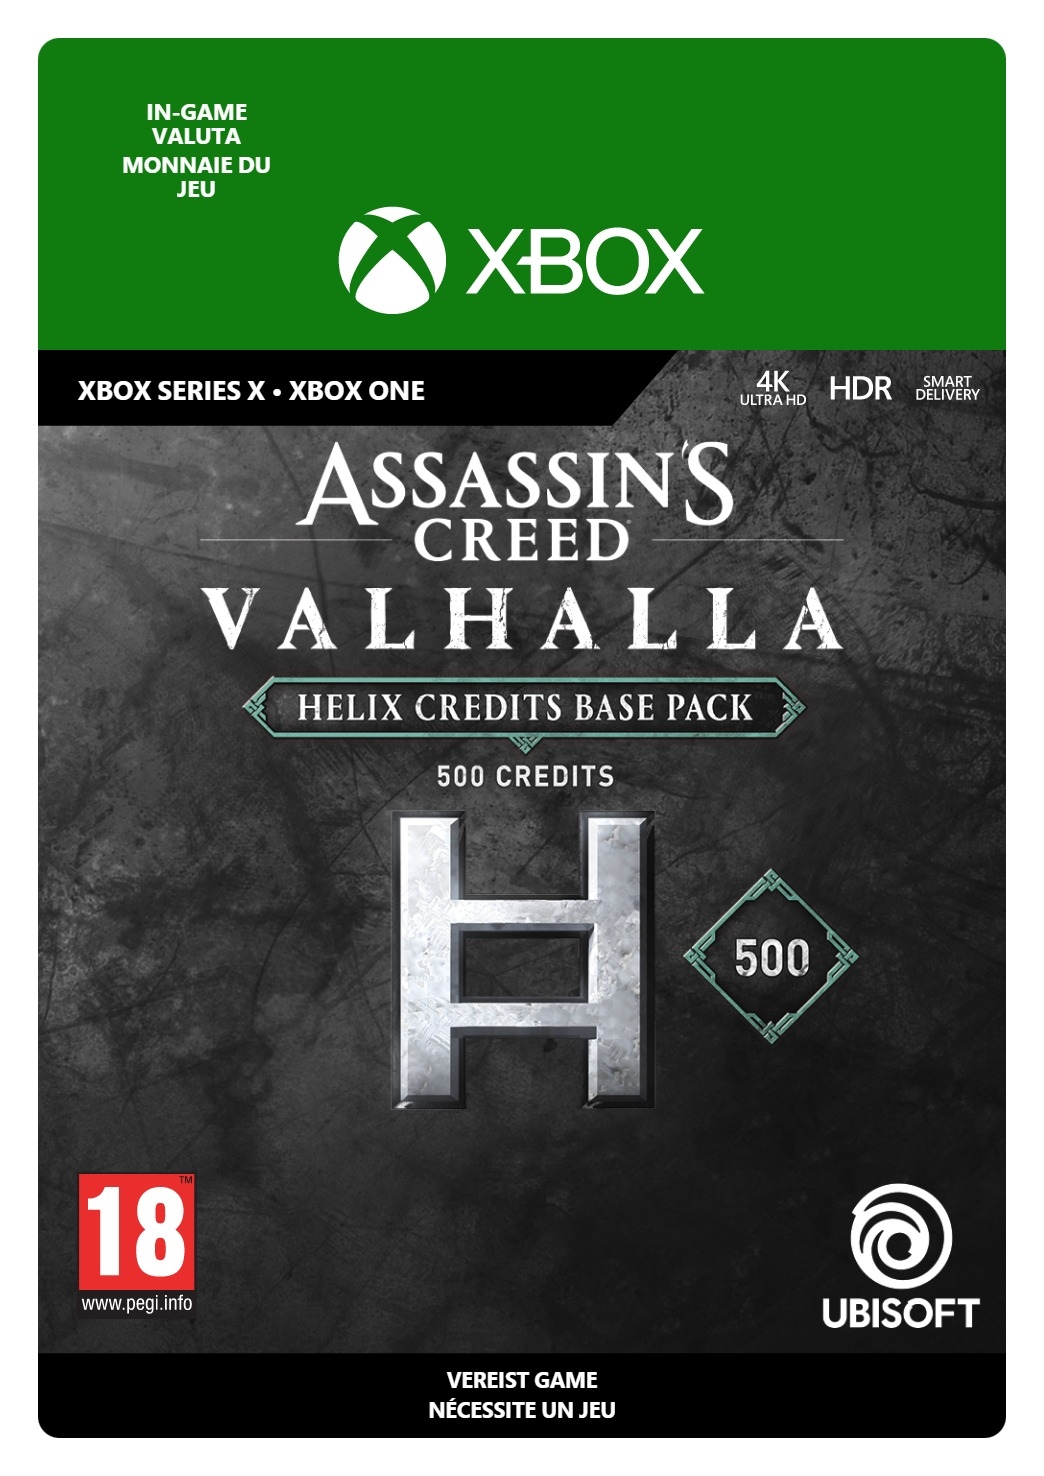 500 Xbox Assassin's Creed Valhalla Helix Credits Base Pack